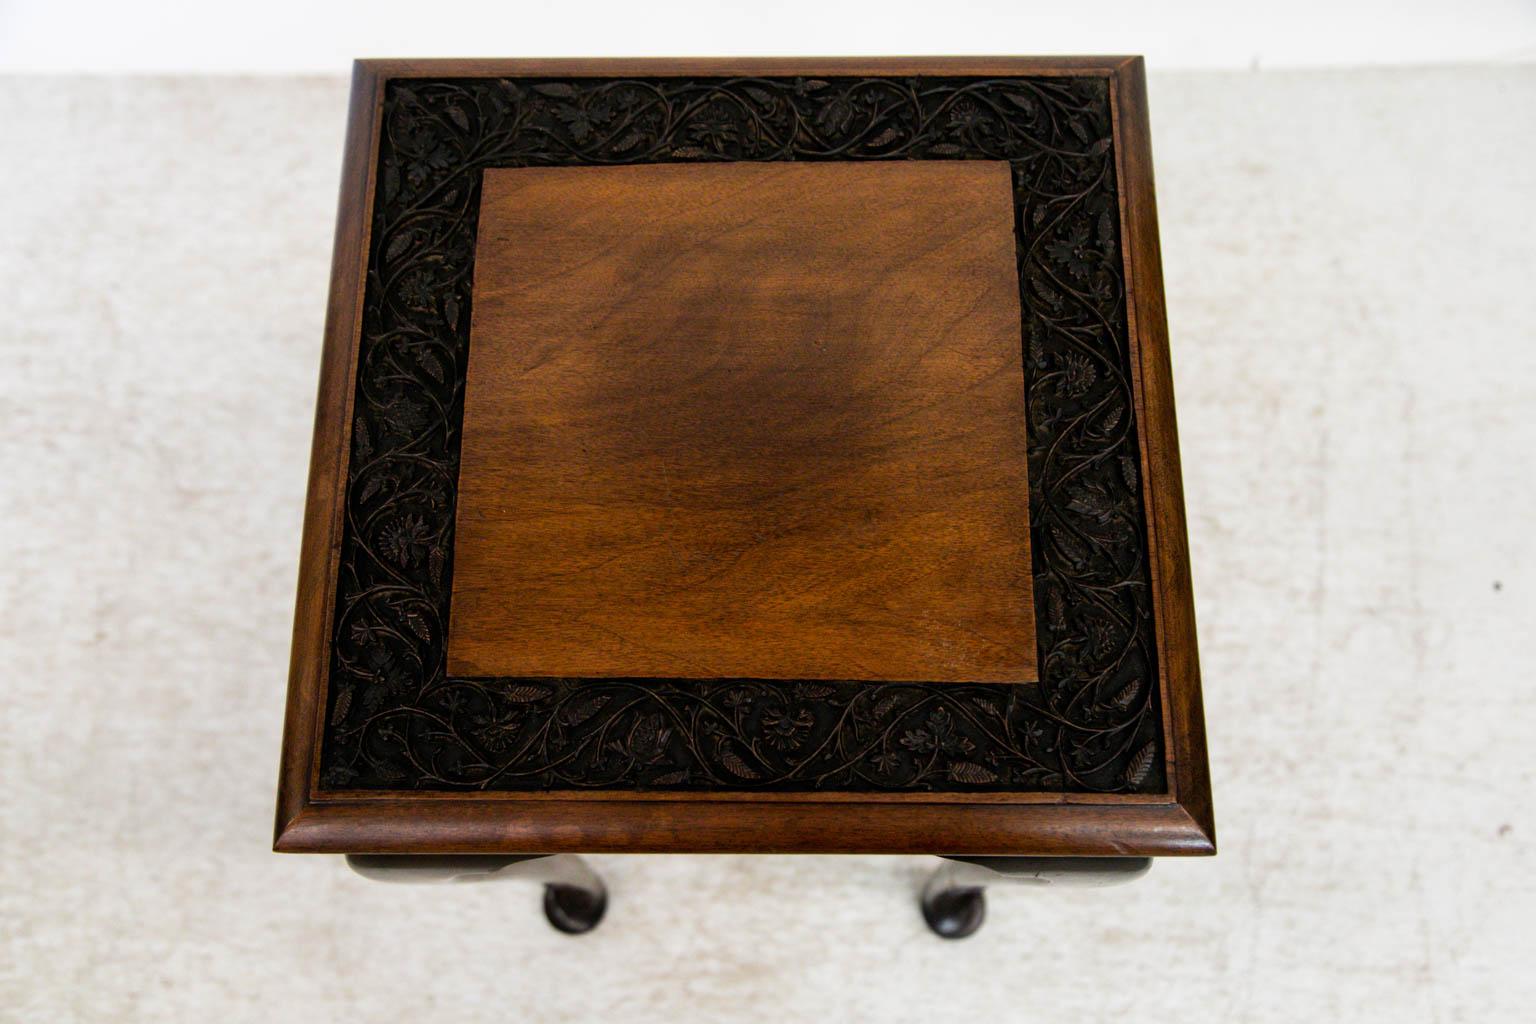 The center of this table has a square mahogany panel framed with an intricately carved border of interlaced leaves, vines, and flowers. The four sided table has cabriole legs that terminate in pad feet.